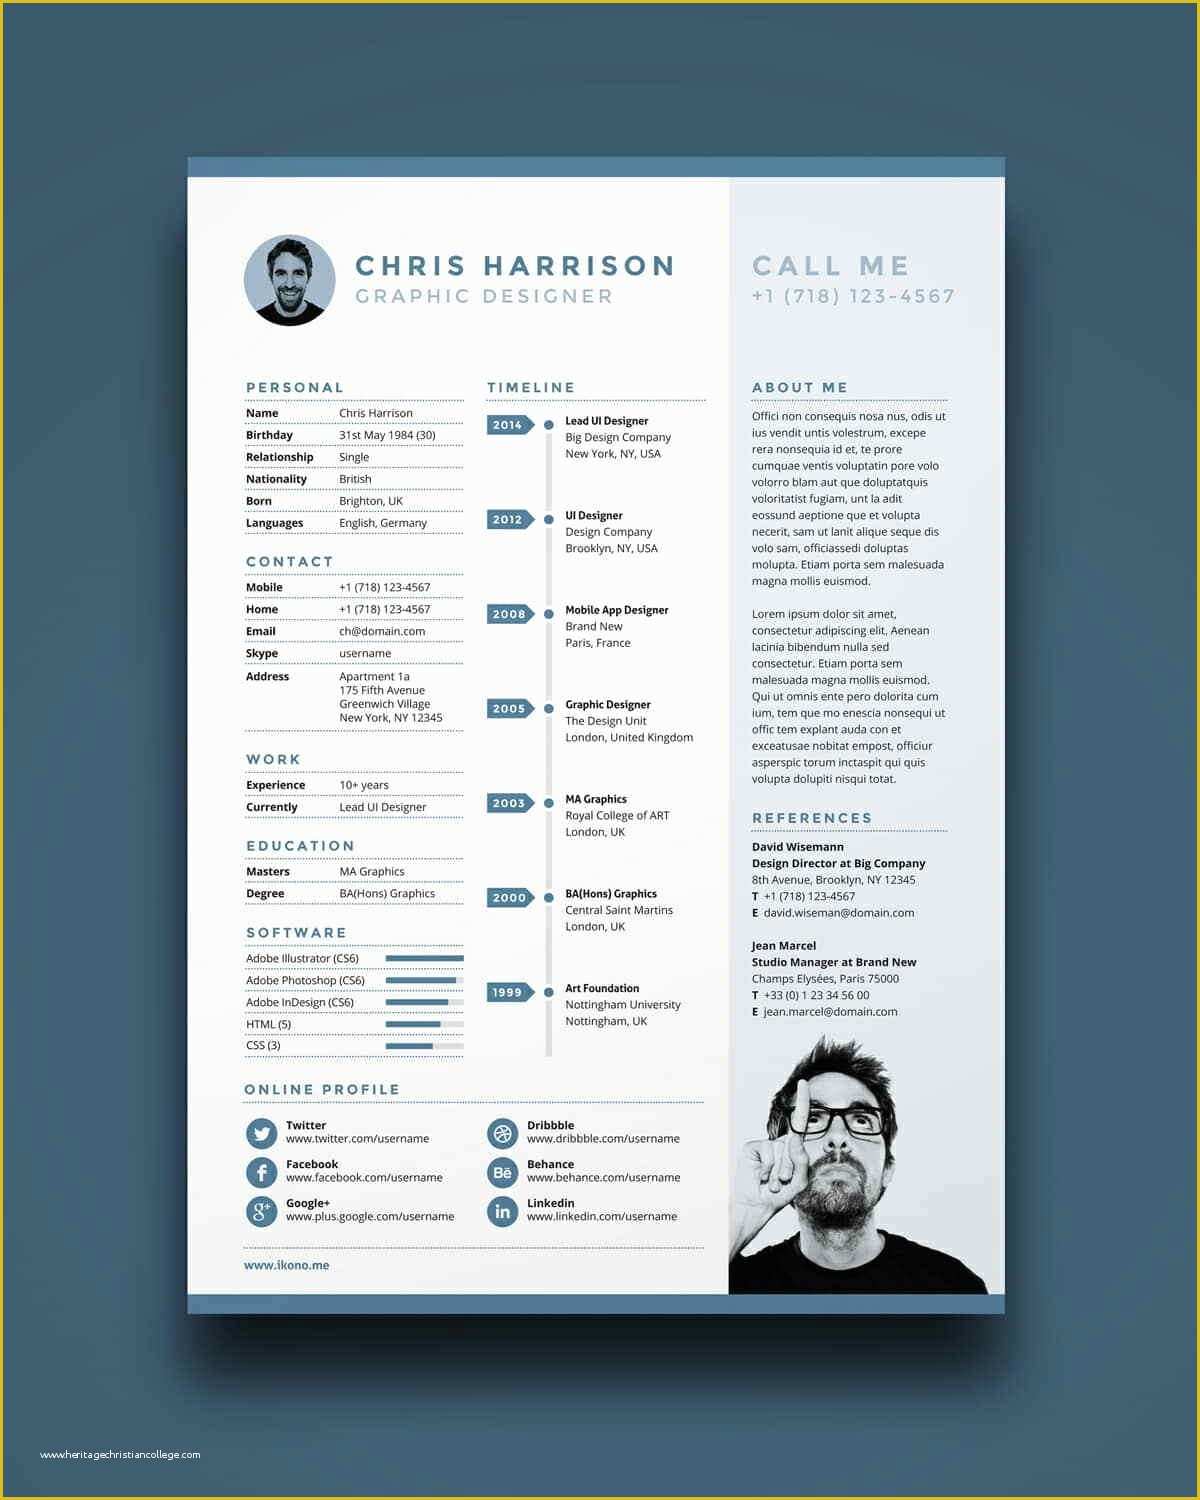 Free Resume Templates for Pages Of Free Resume Templates 17 Free Cv Templates to Download & Use